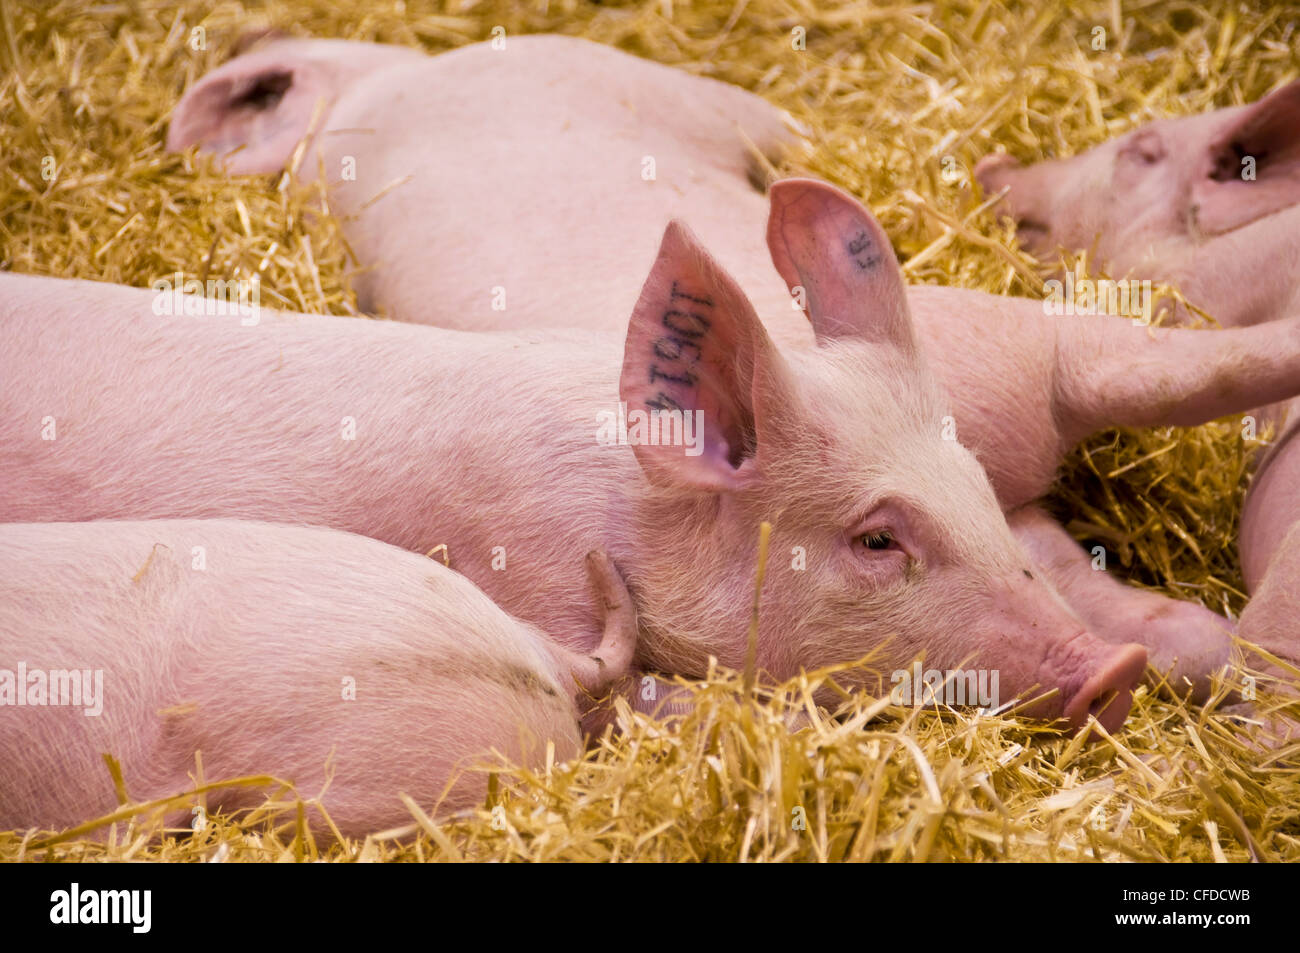 Baby pigs lying in straw at Paris International Agriculture Show - France Stock Photo